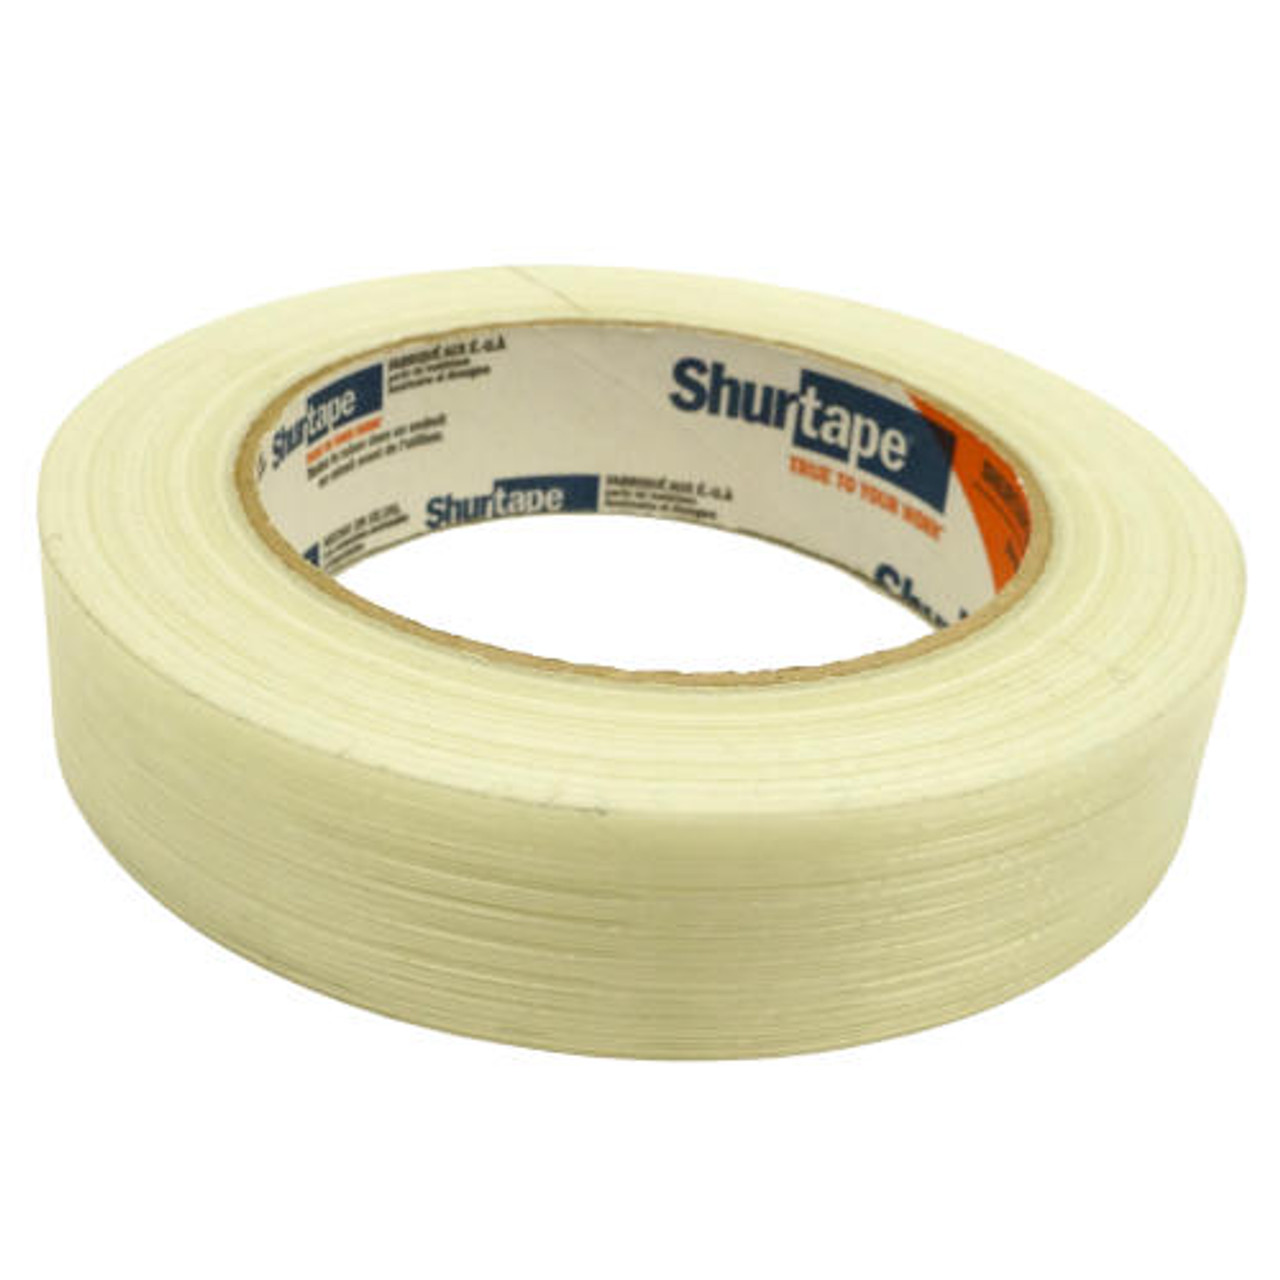 Strapping Tapes - Shurtape